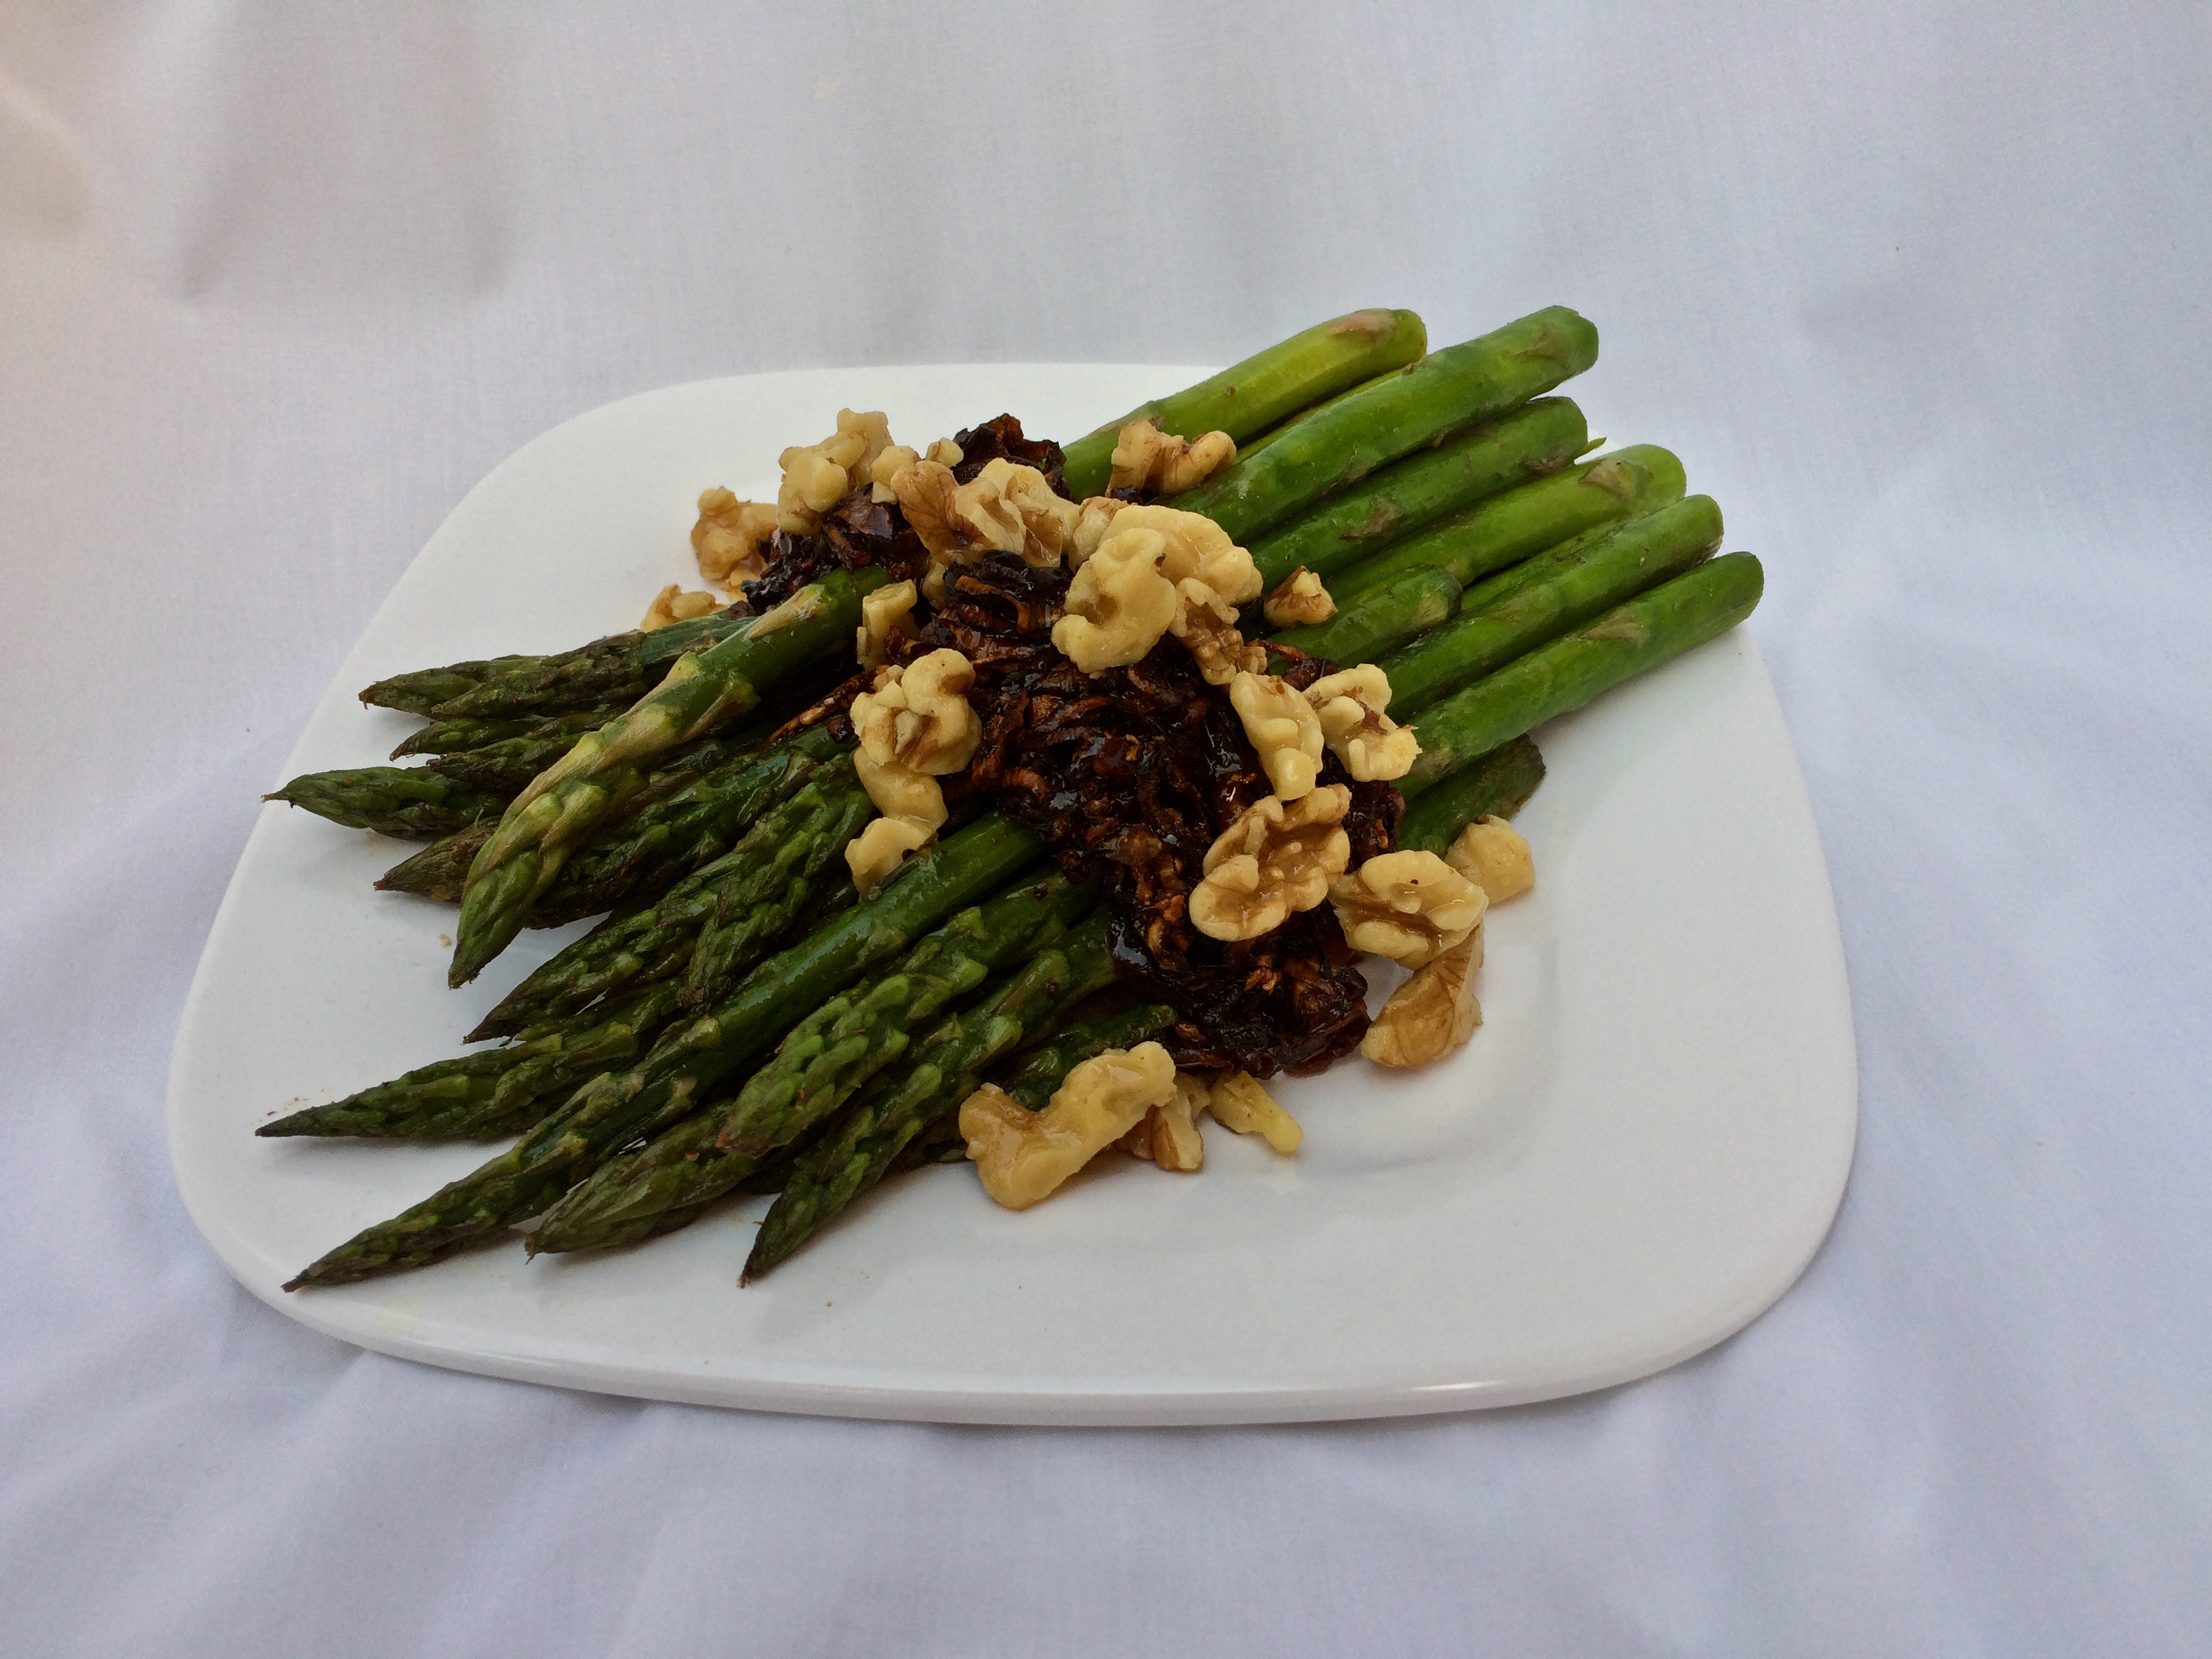 Skillet Asparagus with Caramelized Onions and Walnuts 